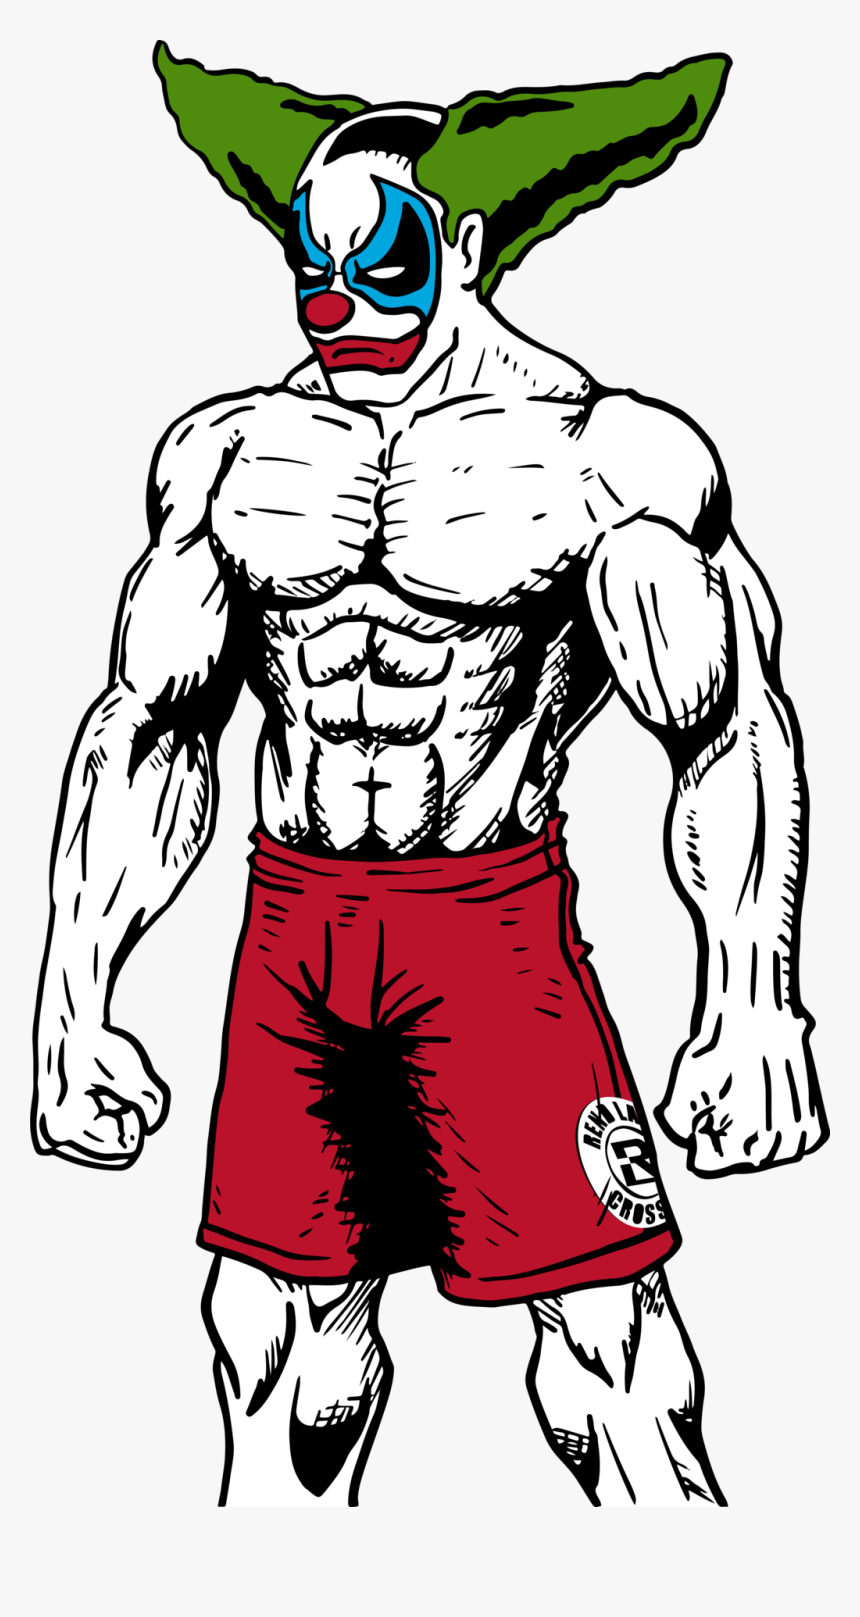 Crossfit Evil Clown Drawing - Pukey The Clown, HD Png Download, Free Download